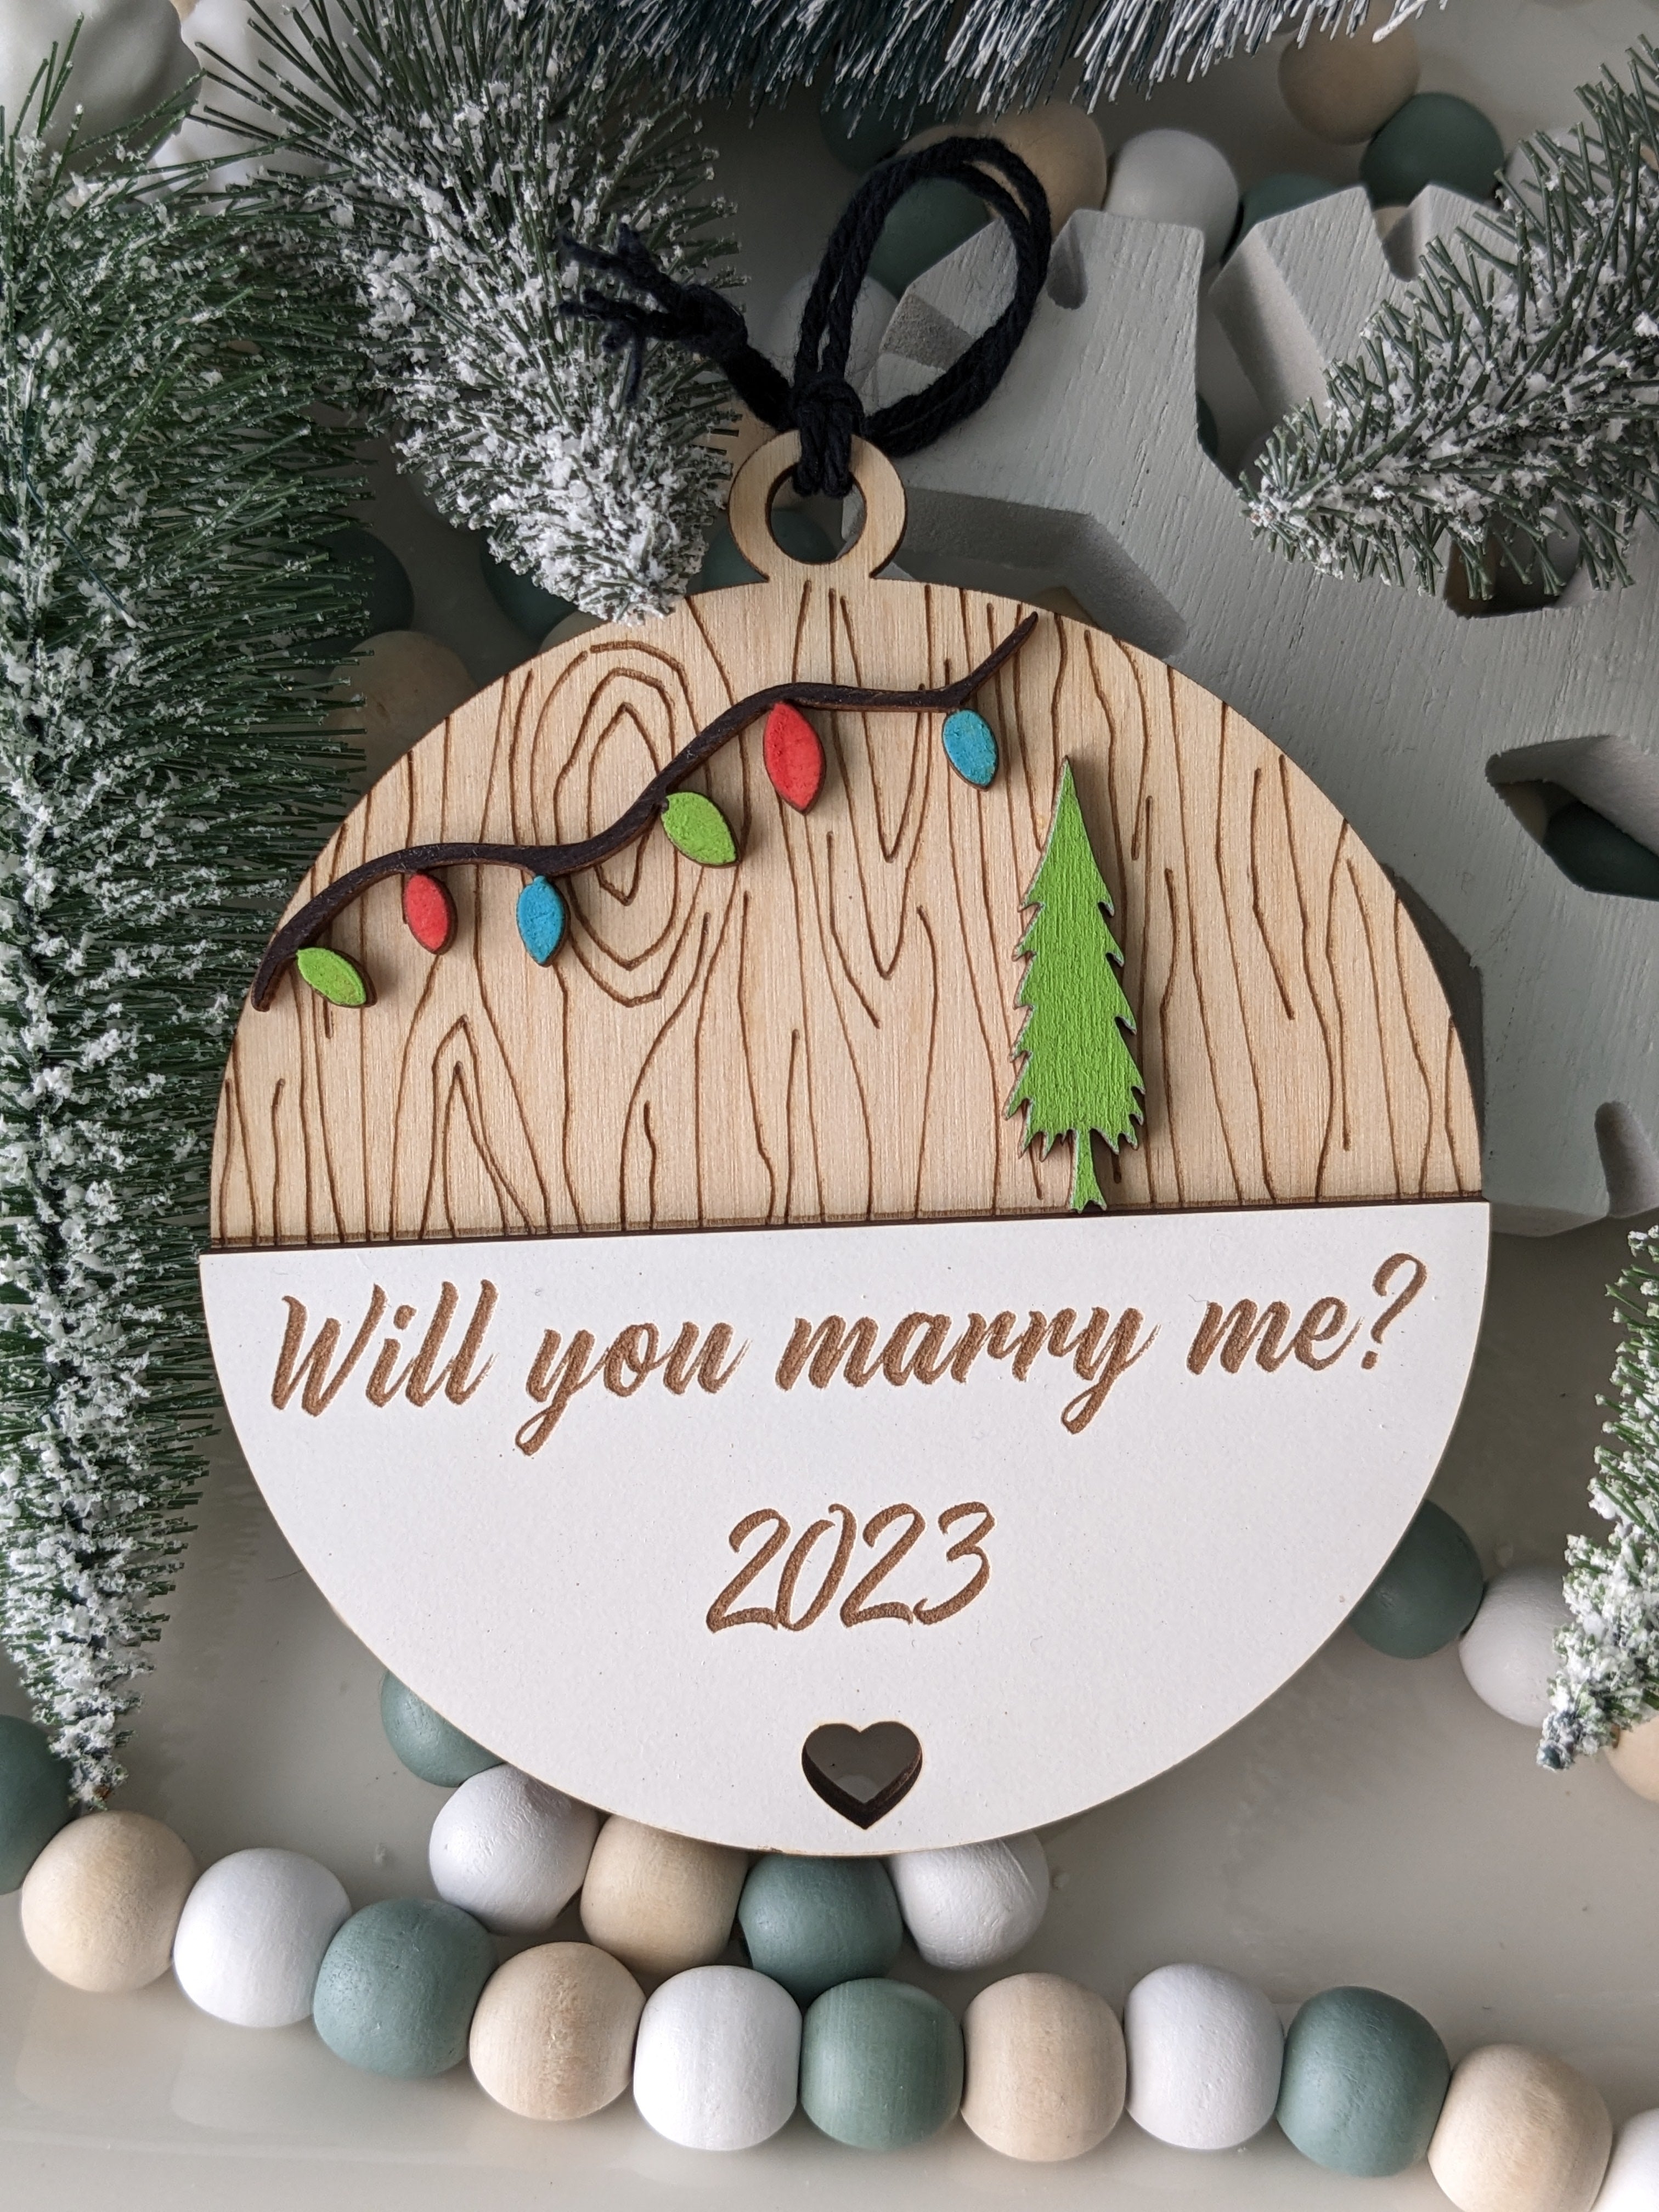 Will You Marry Me 2023 Ornament | Engagement 2023 Ornament | Marry Me 2023 Ornament | Proposal 2023 Ornament | Christmas Proposal 2023